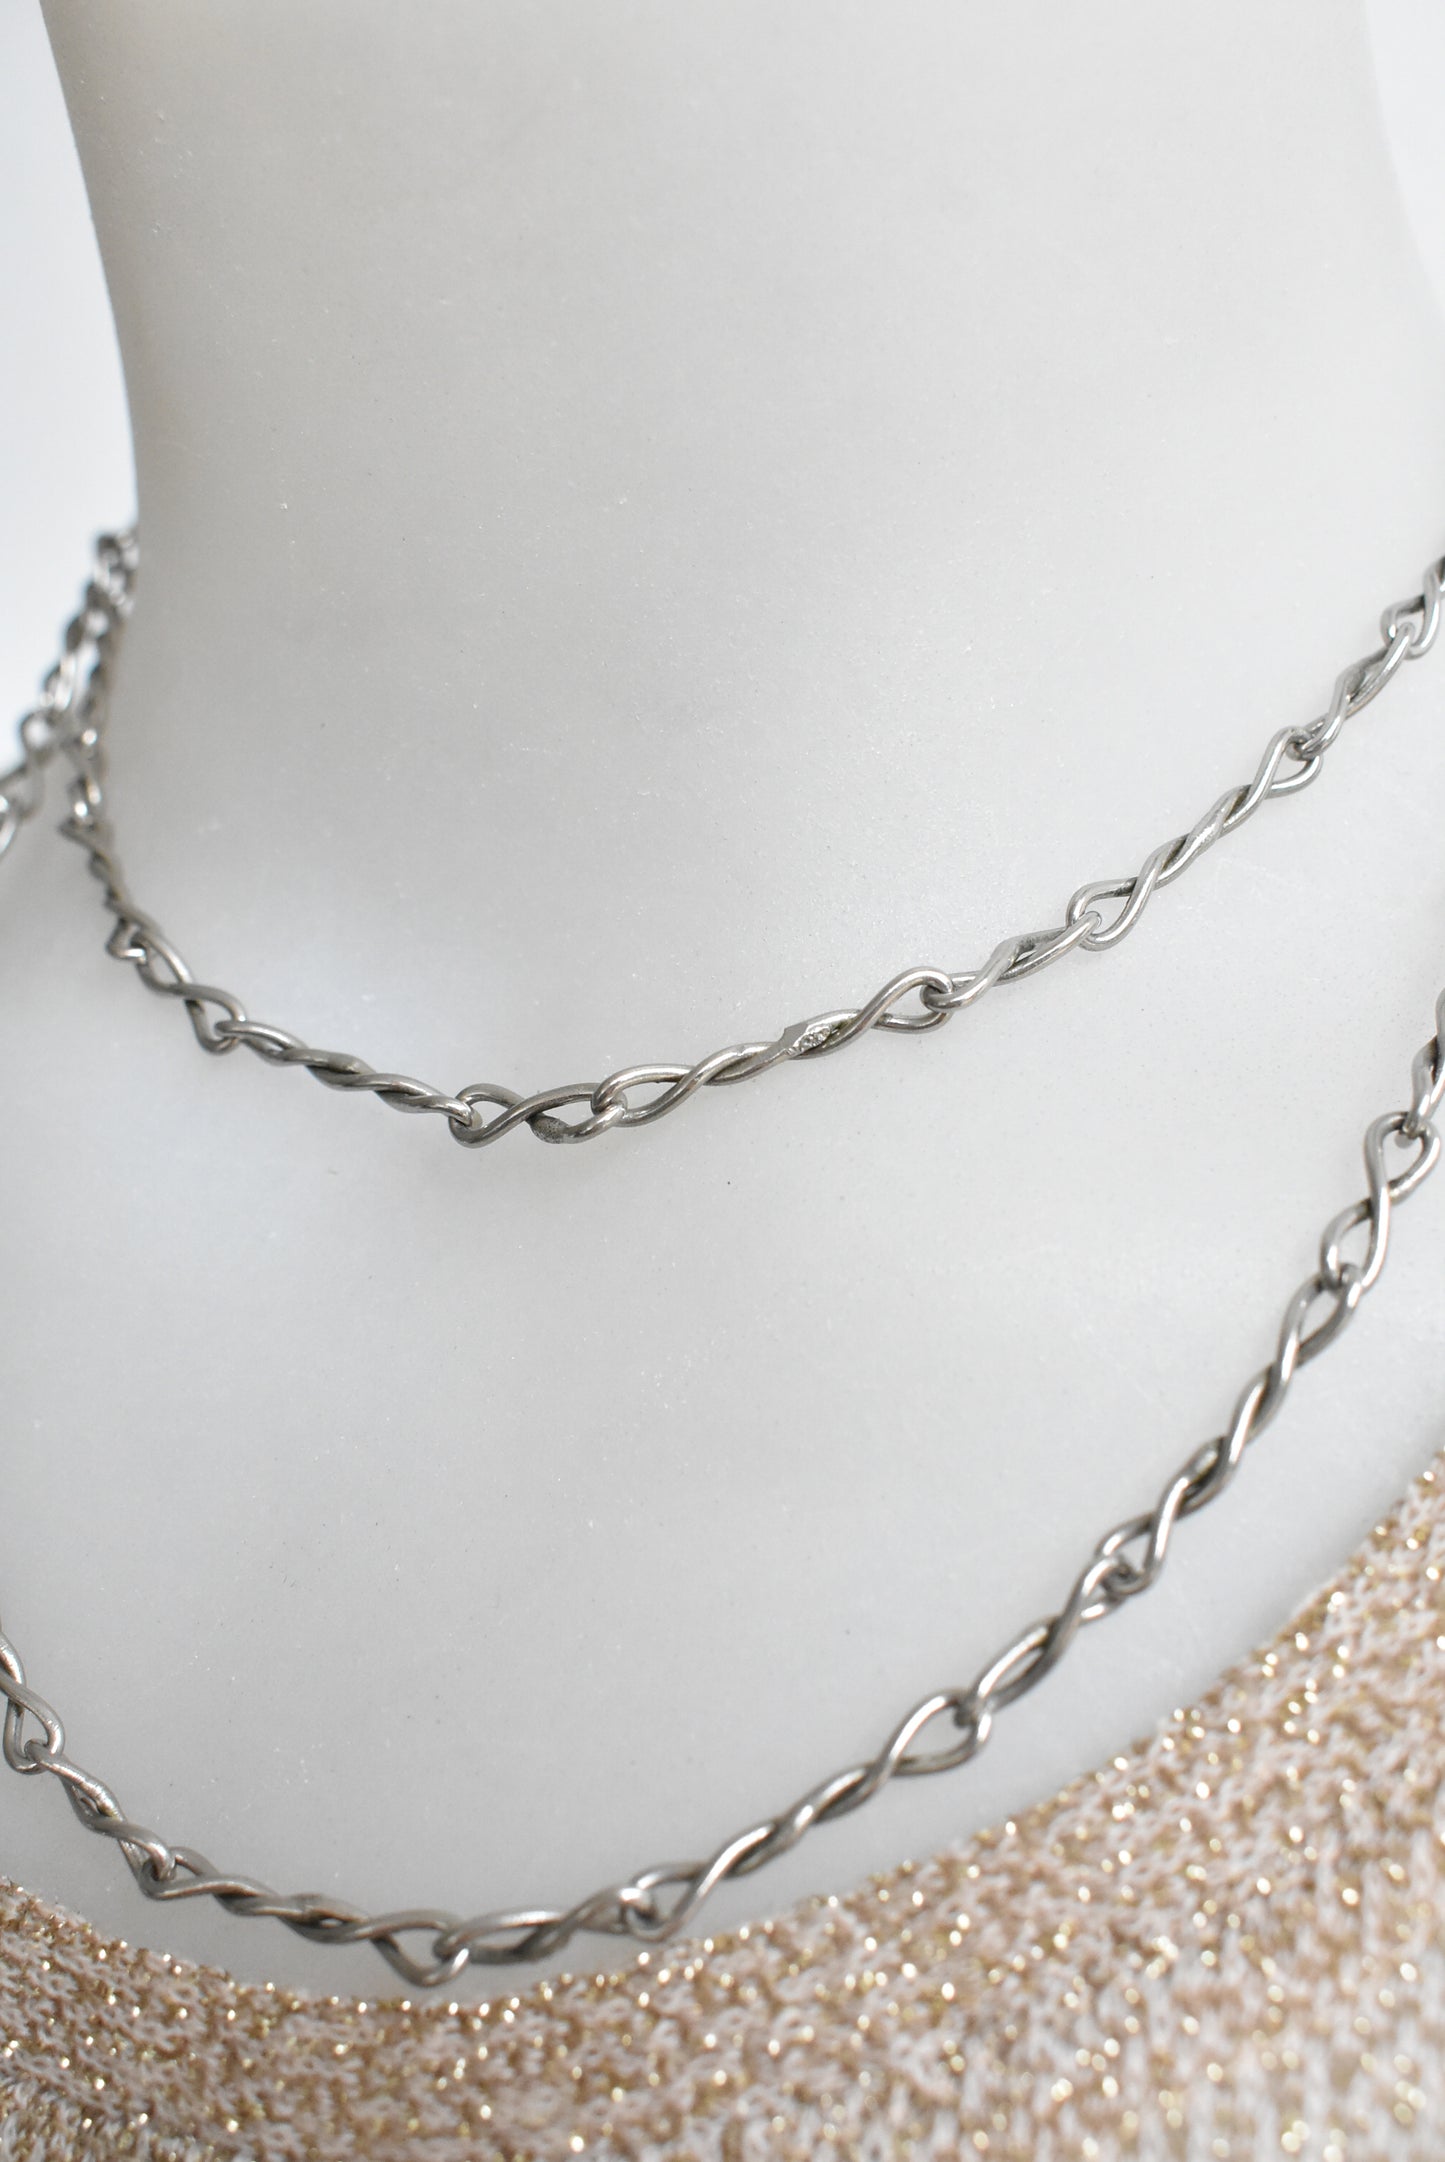 Long chain necklace